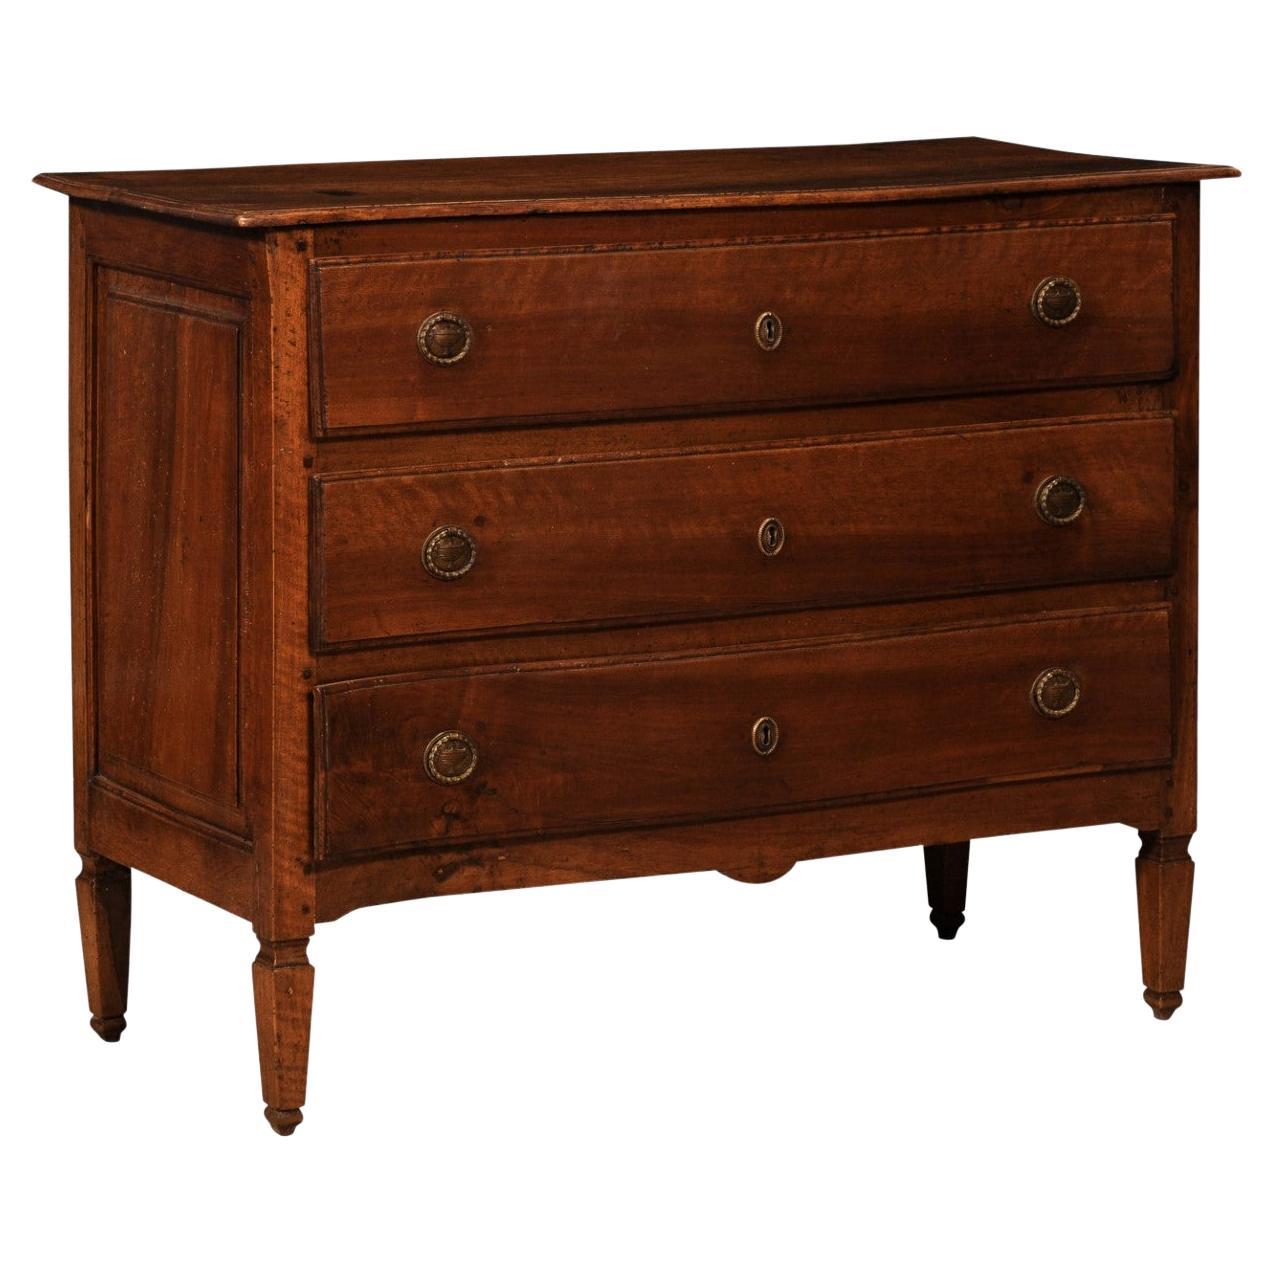 Italian 1820s Serpentine Front Walnut Commode with Three Drawers